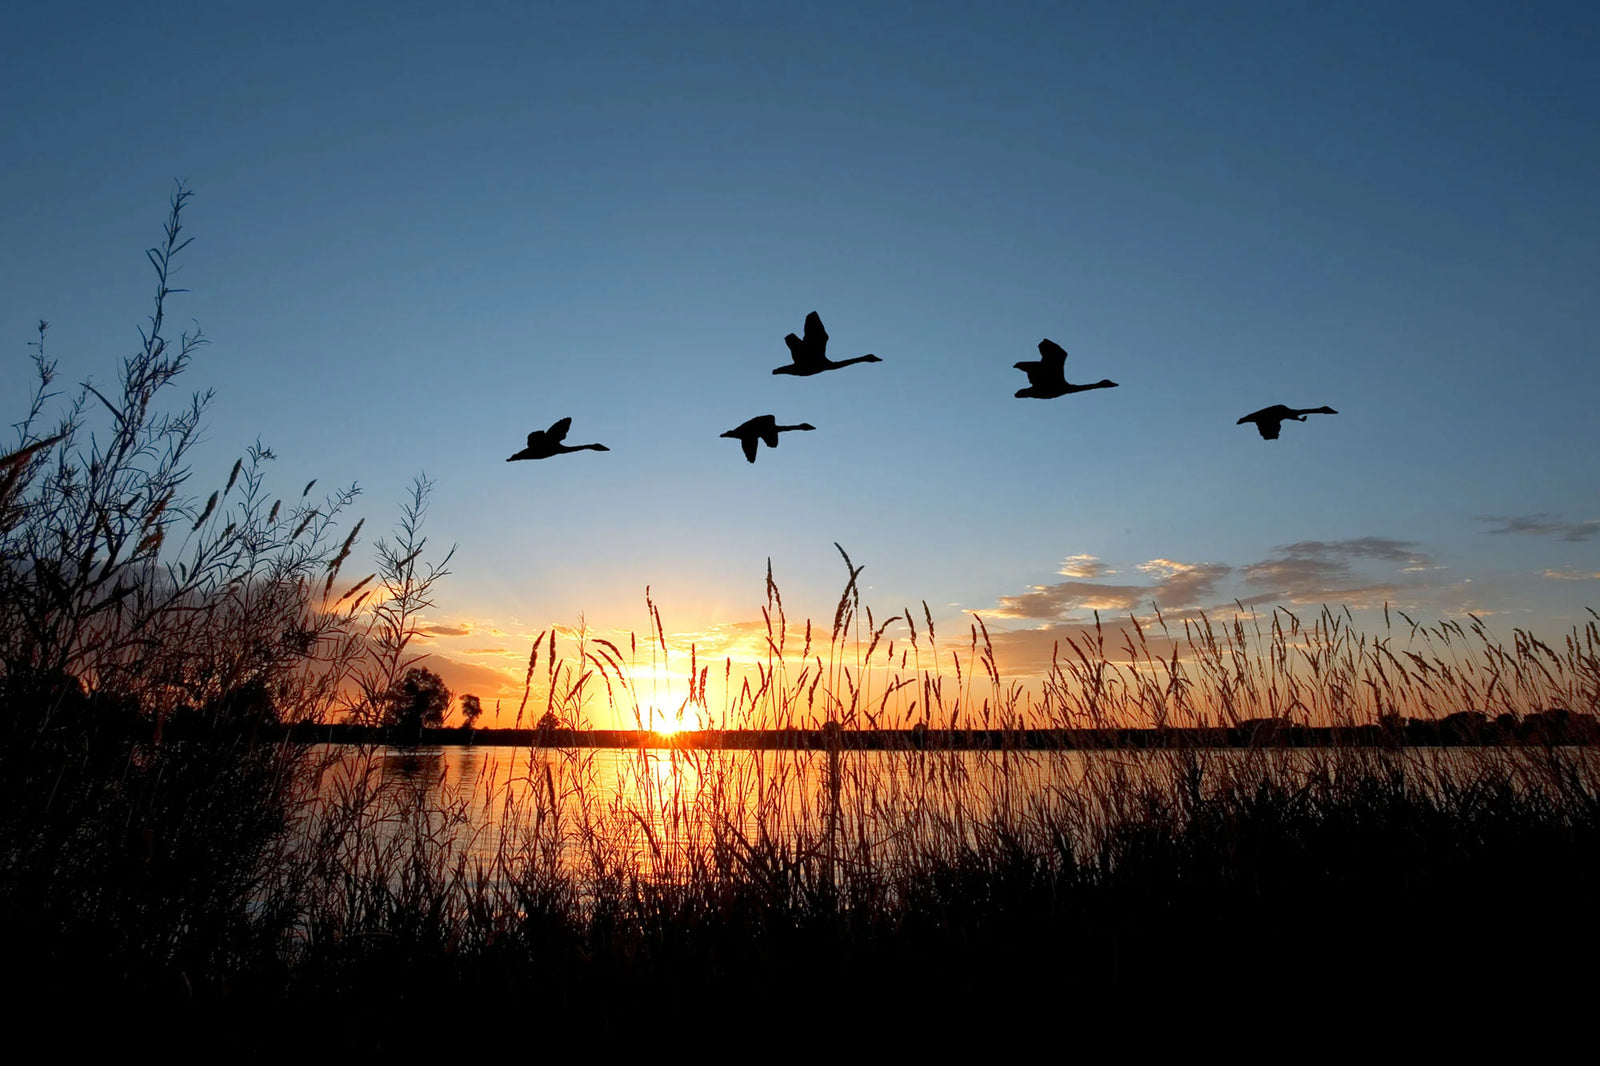 Geese flying over a pond at sunrise